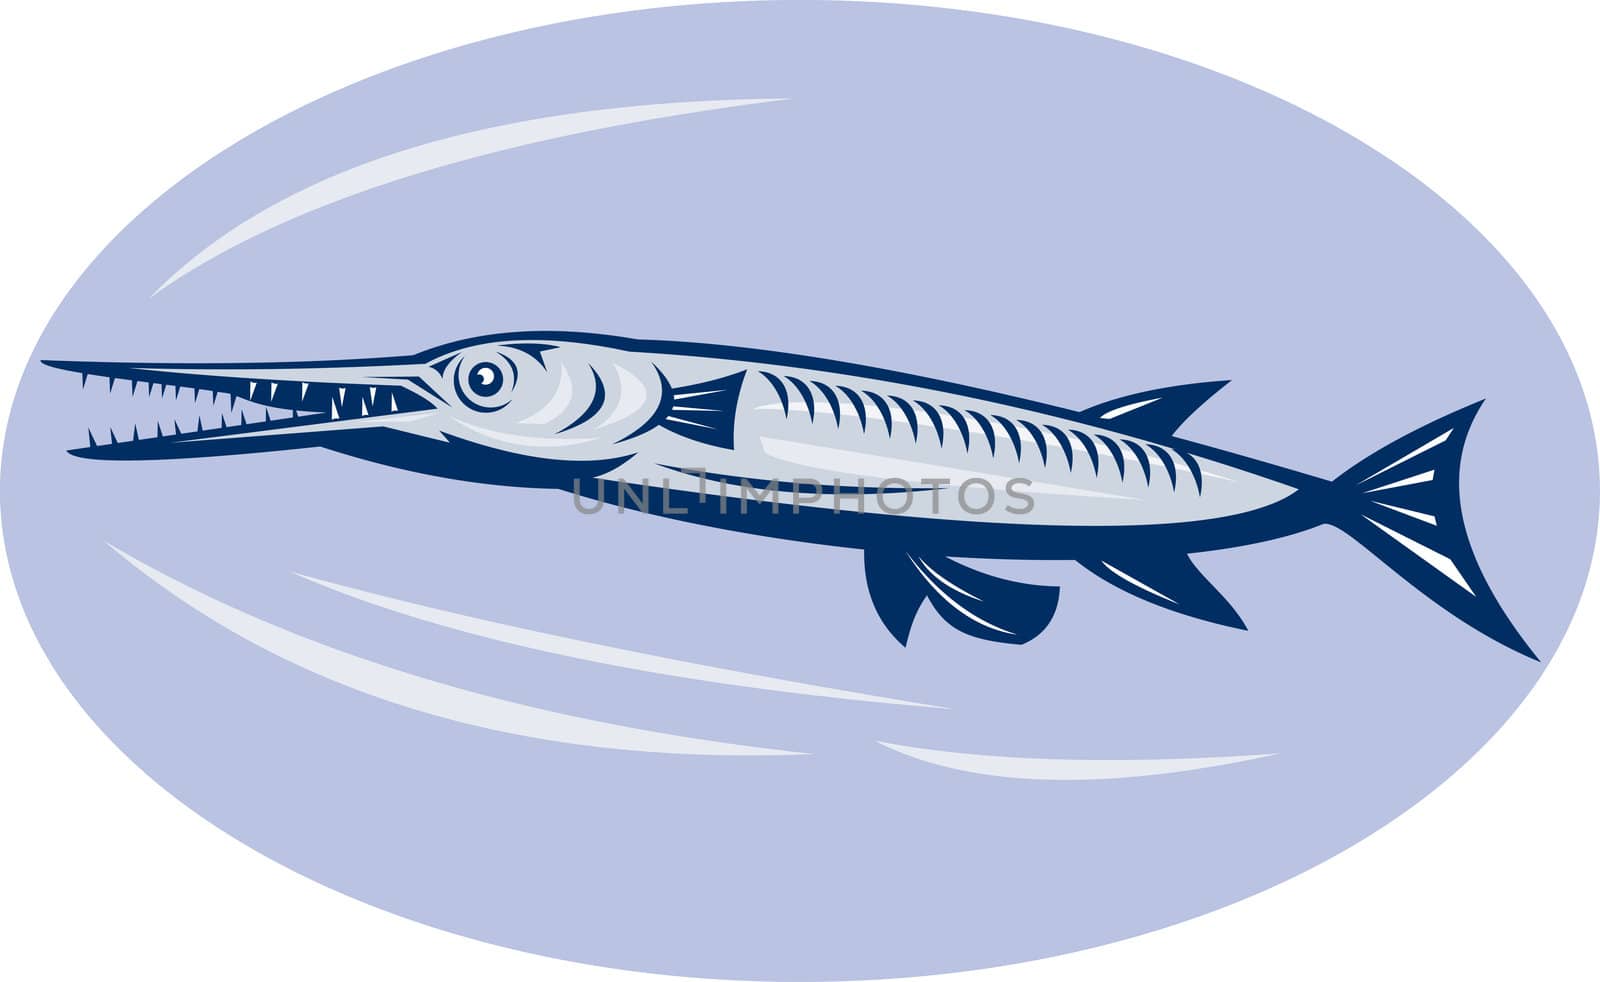 illustration of a Needlefish (family Belonidae)done in retro woodcut style.